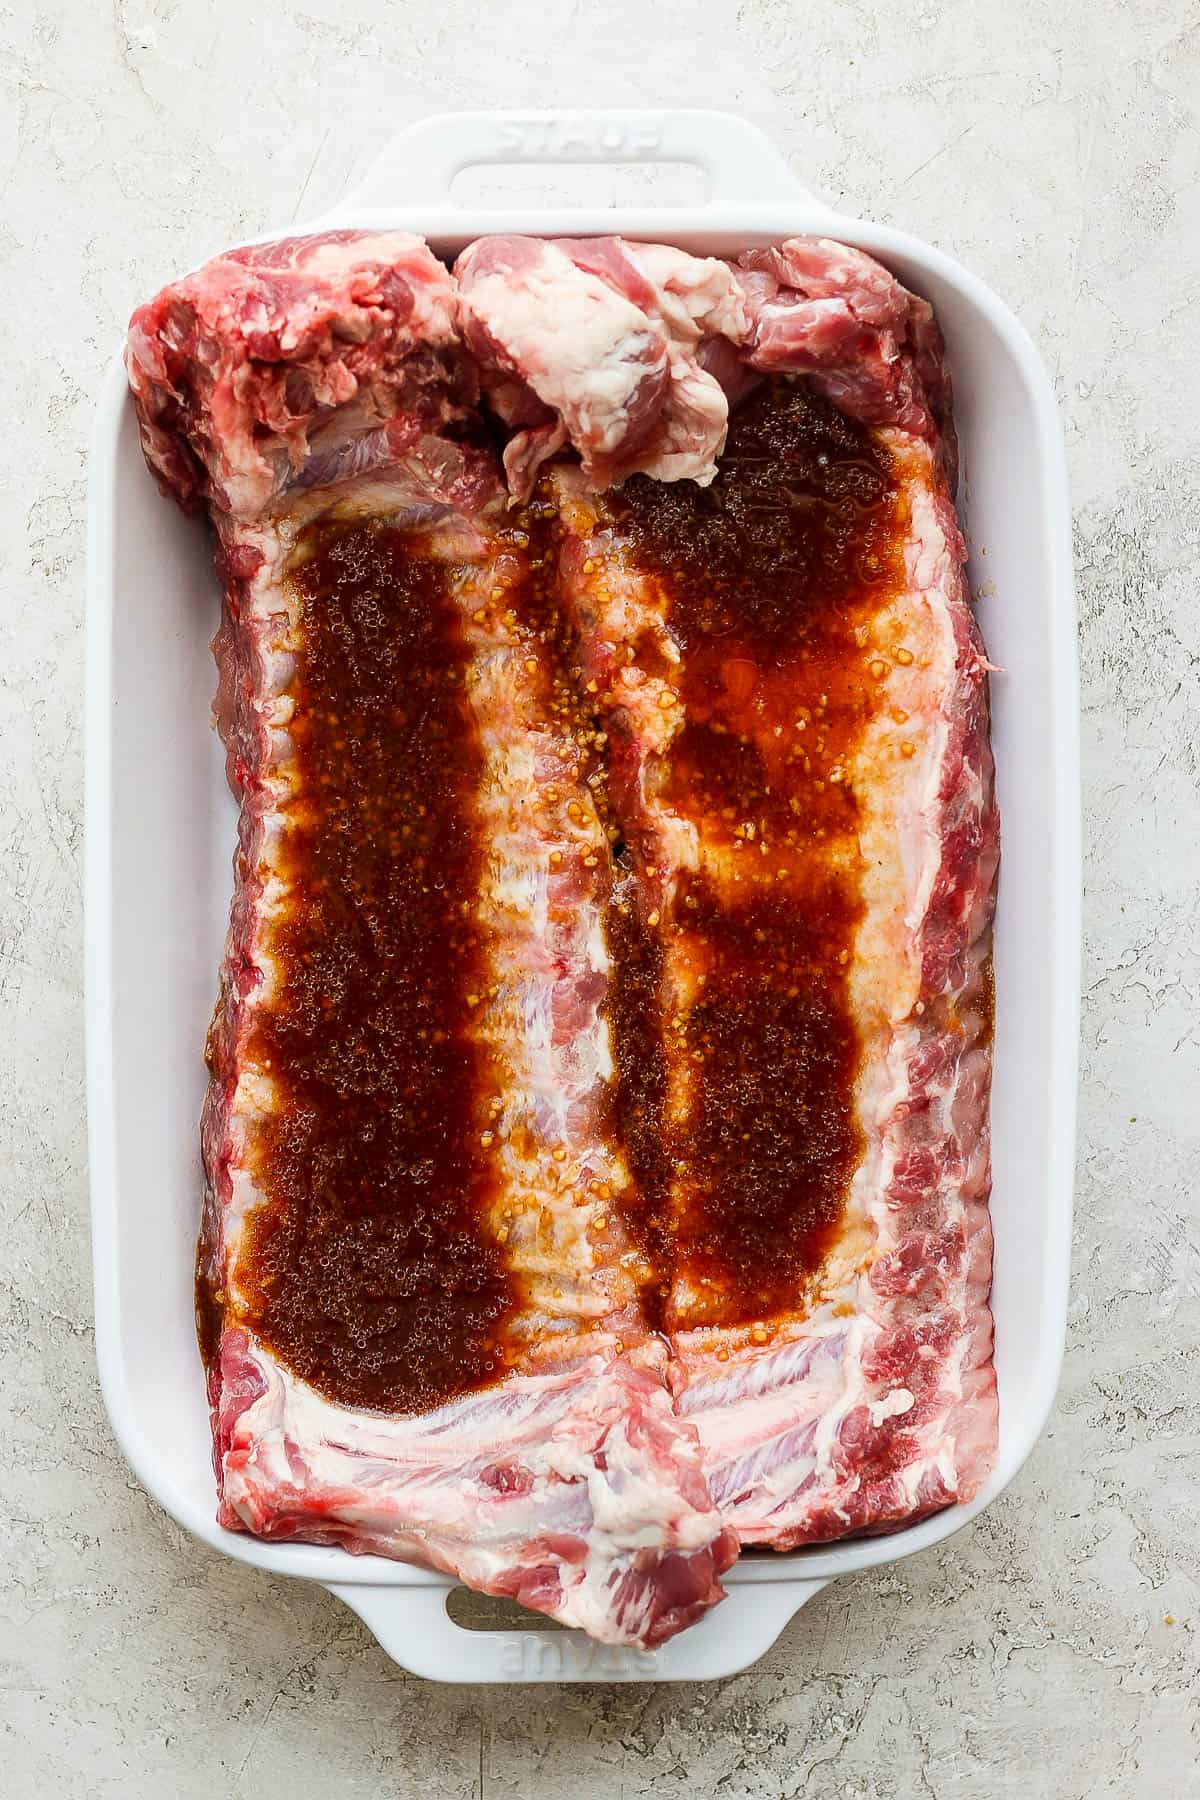 Rib marinade poured over two racks of ribs in a white baking dish.